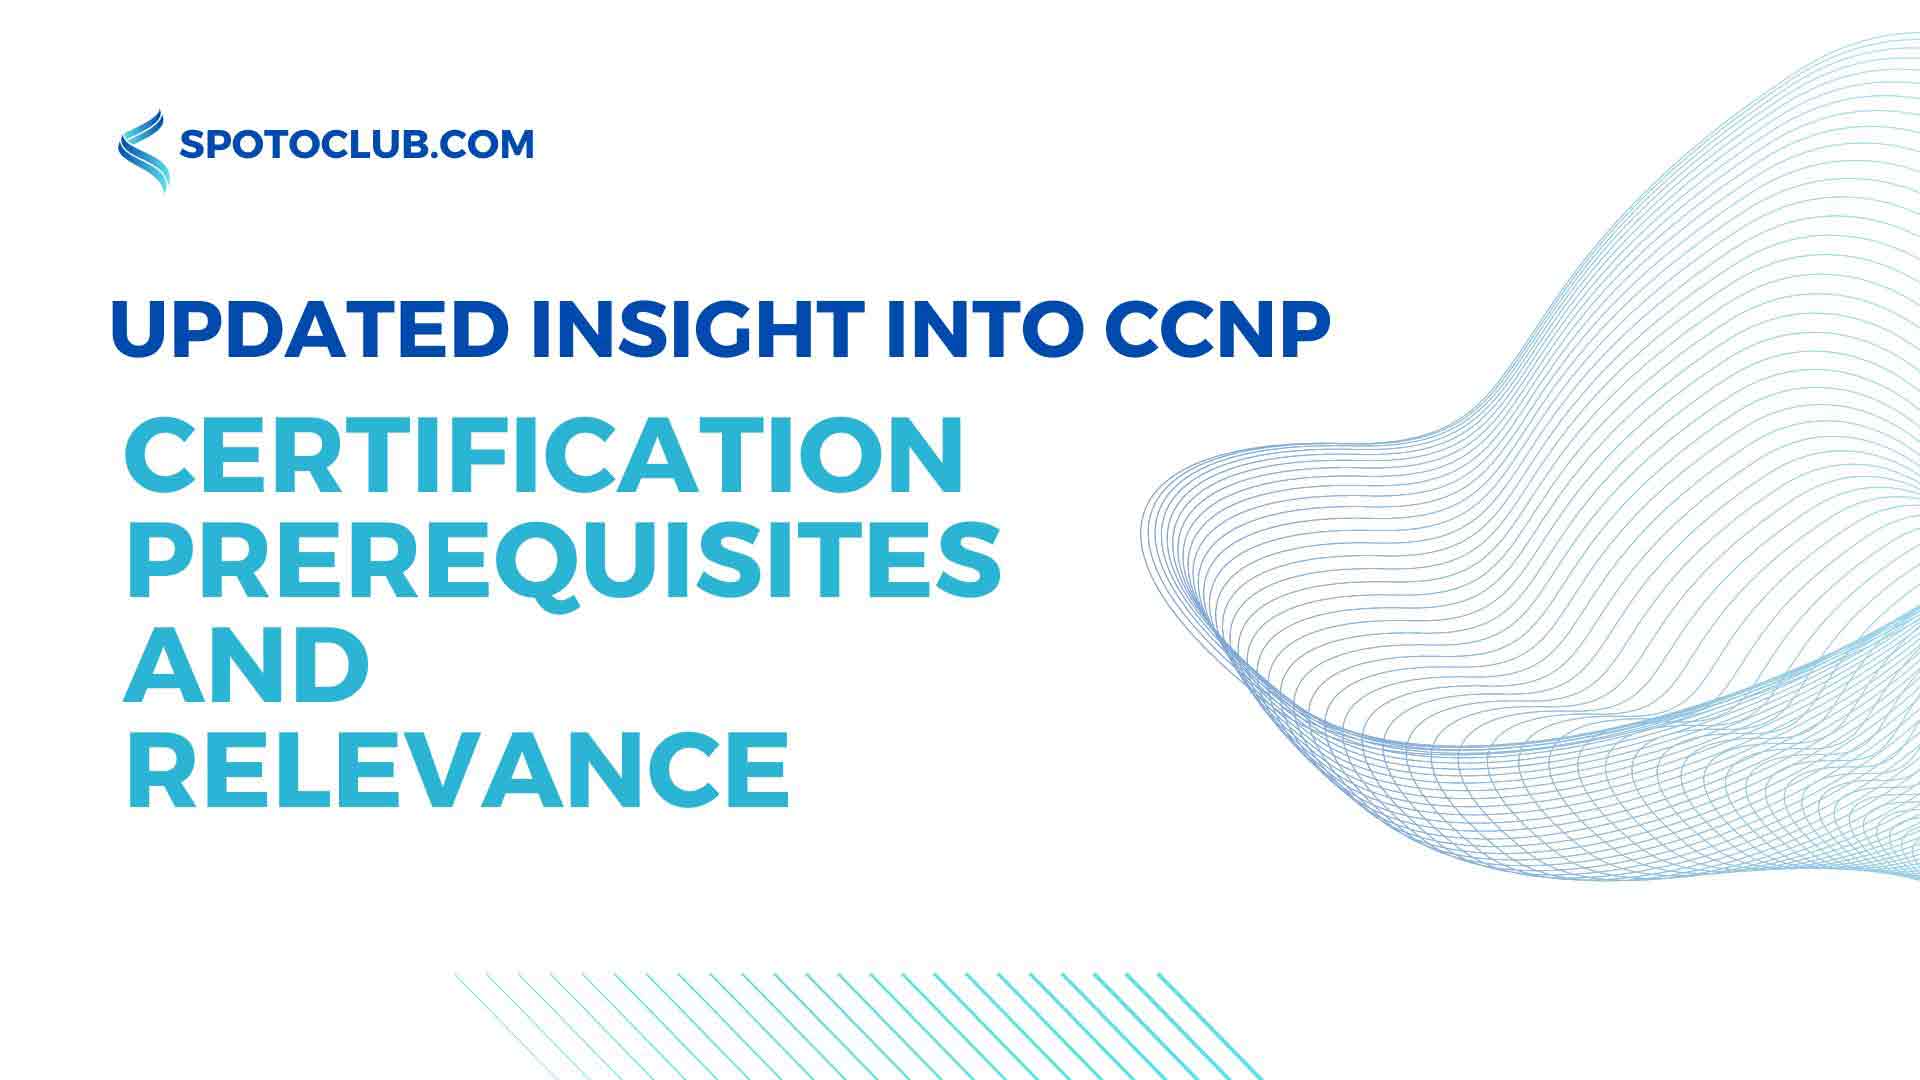 CCNP Certification Prerequisites and Relevance